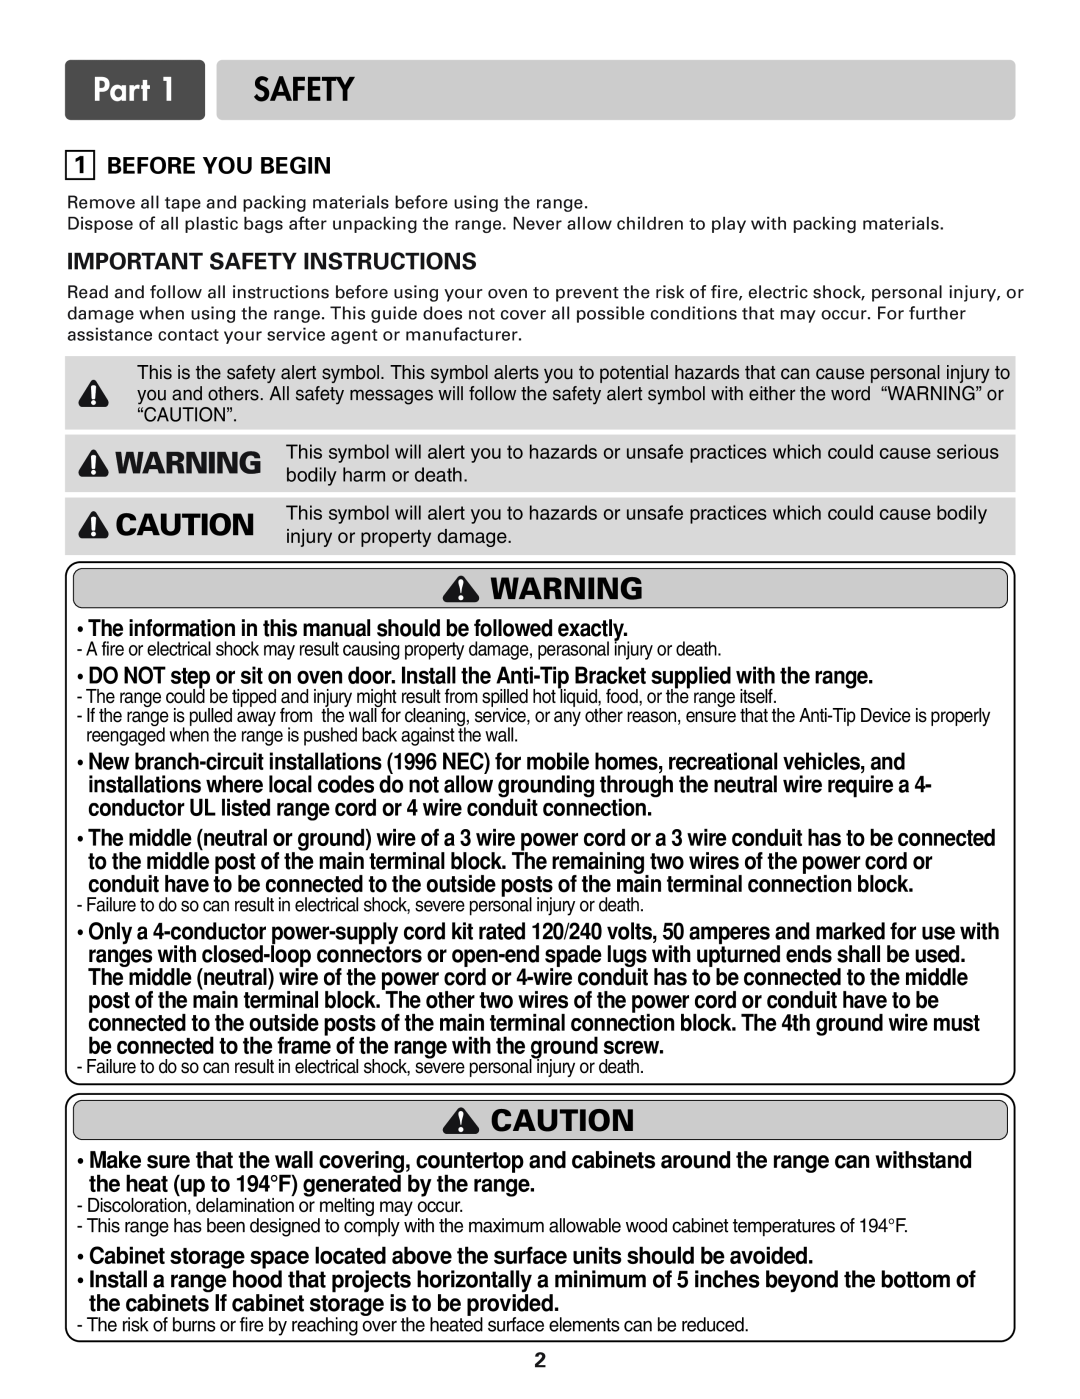 LG Electronics LRE3012S installation manual Part, Before You Begin, Important Safety Instructions 